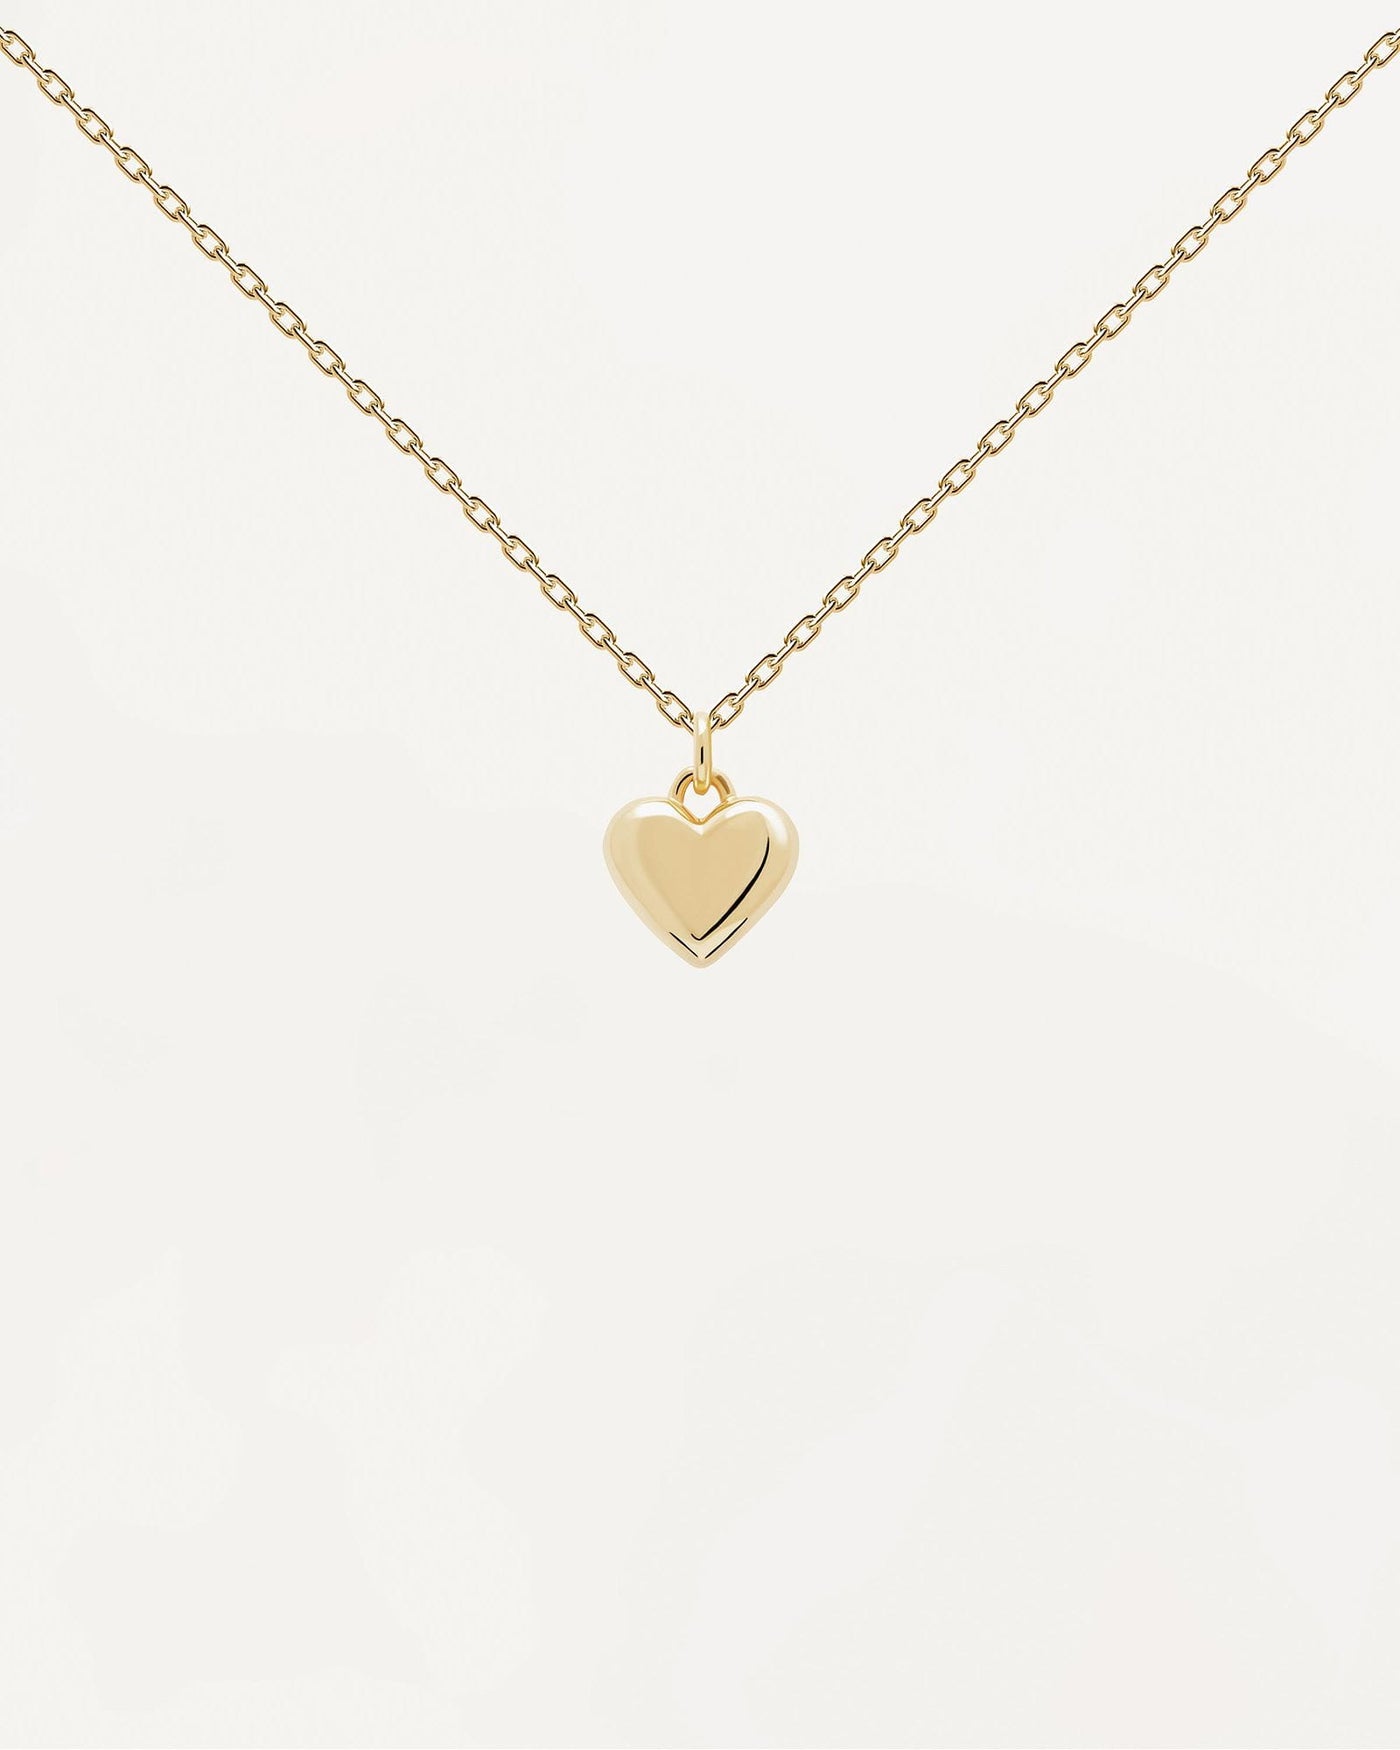 2024 Selection | L'Absolu Necklace. Gold-plated silver necklace with engravable heart pendant to customize. Get the latest arrival from PDPAOLA. Place your order safely and get this Best Seller. Free Shipping.